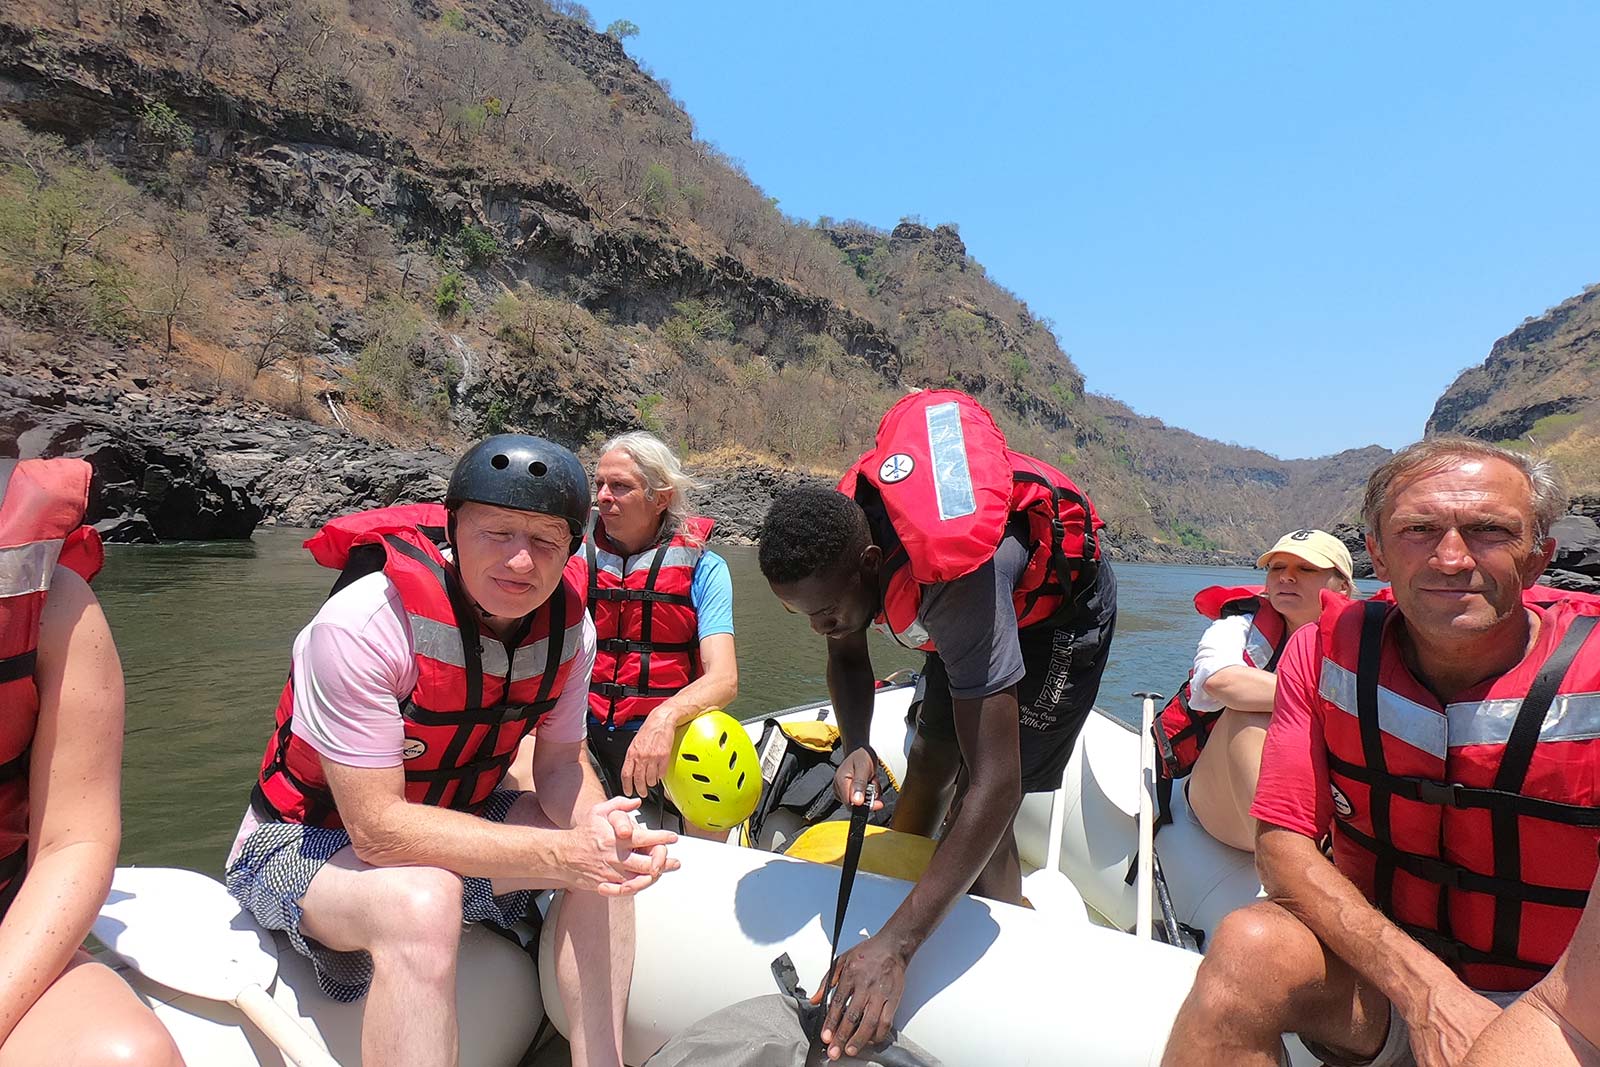 Dad and companions at Victoria Falls white water rafting in Zimbabwe, Africa. A bloodied nose, cracked rib and saving a life